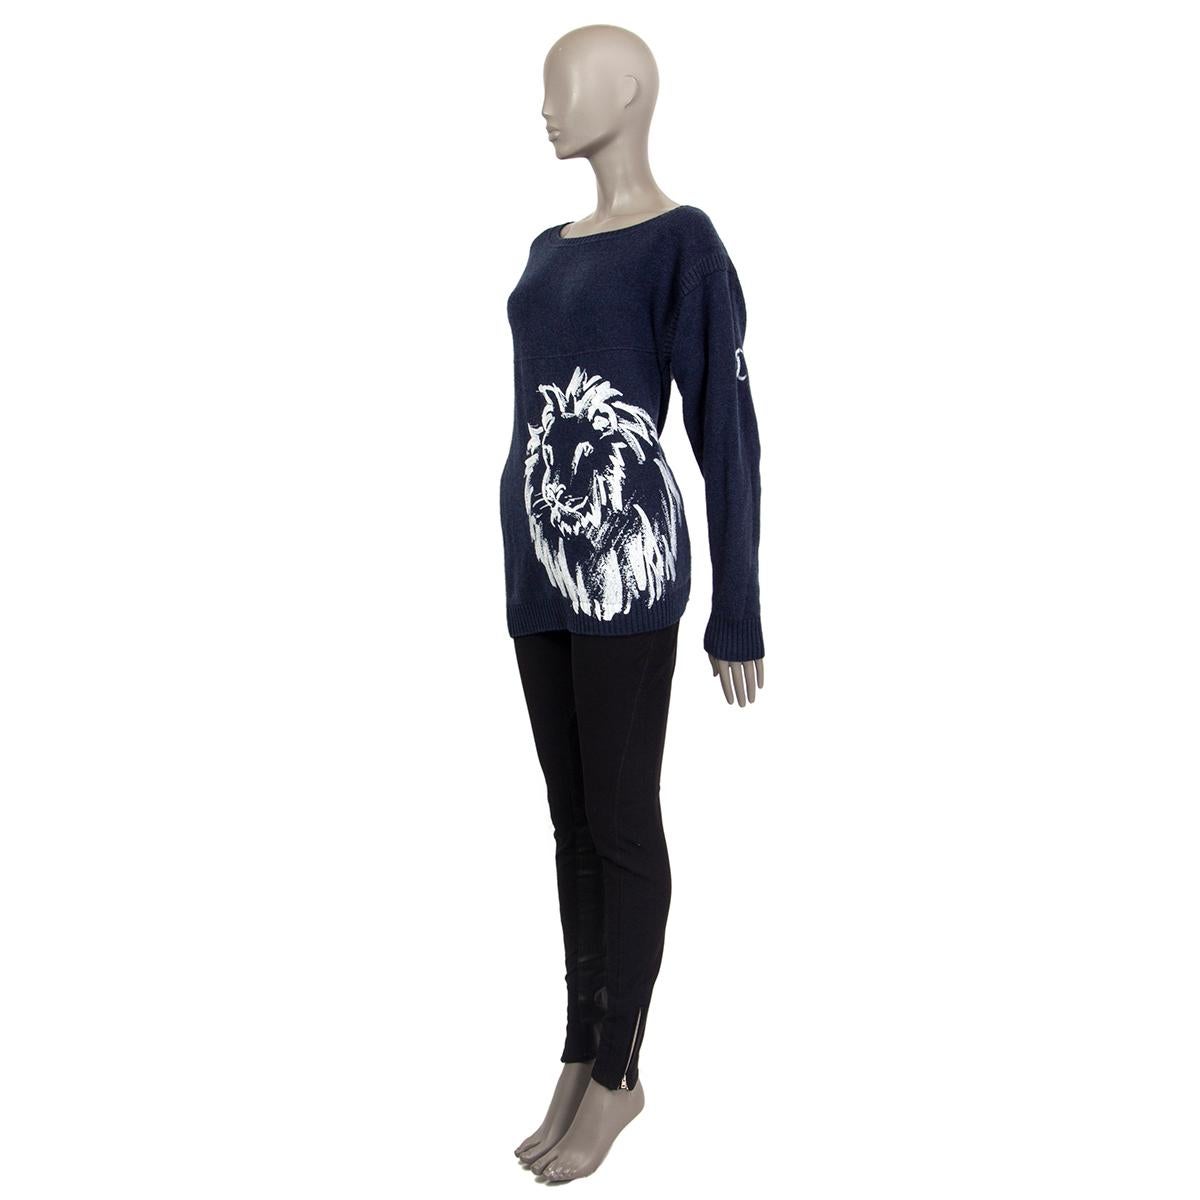 Chanel lion-print sweater in dark blue cashmere (100%) with white print. Has been worn and is in excellent condition.

Tag Size 36
Size S
Shoulder Width 50cm (19.5in)
Bust 94cm (36.7in) to 102cm (39.8in)
Waist 88cm (34.3in) to 100cm (39in)
Hips 90cm